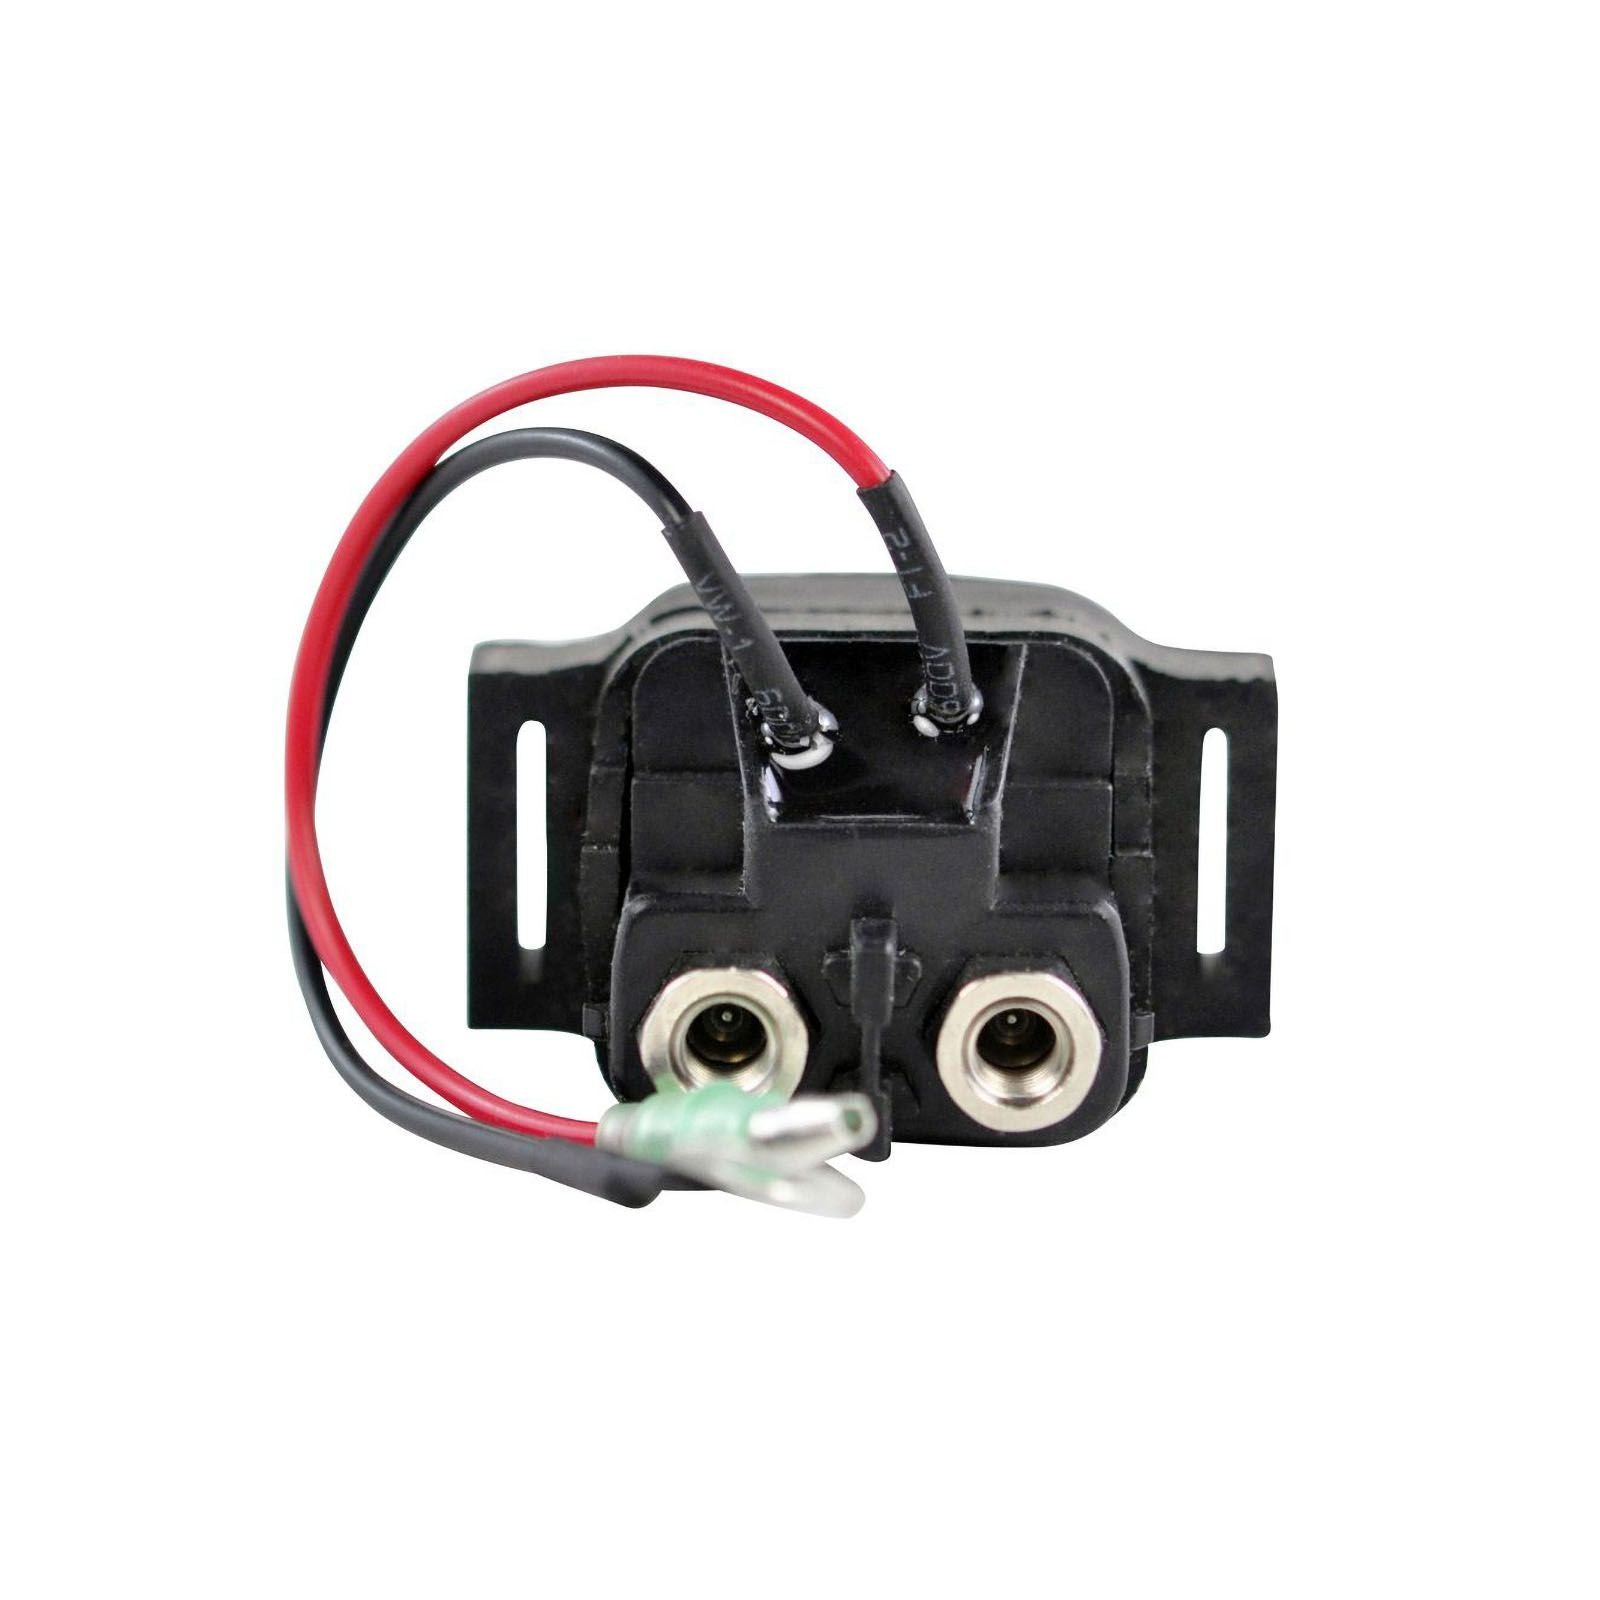 New RMSTATOR Starter Relay Solenoid - Assorted For Yamaha Models #RMS090101732